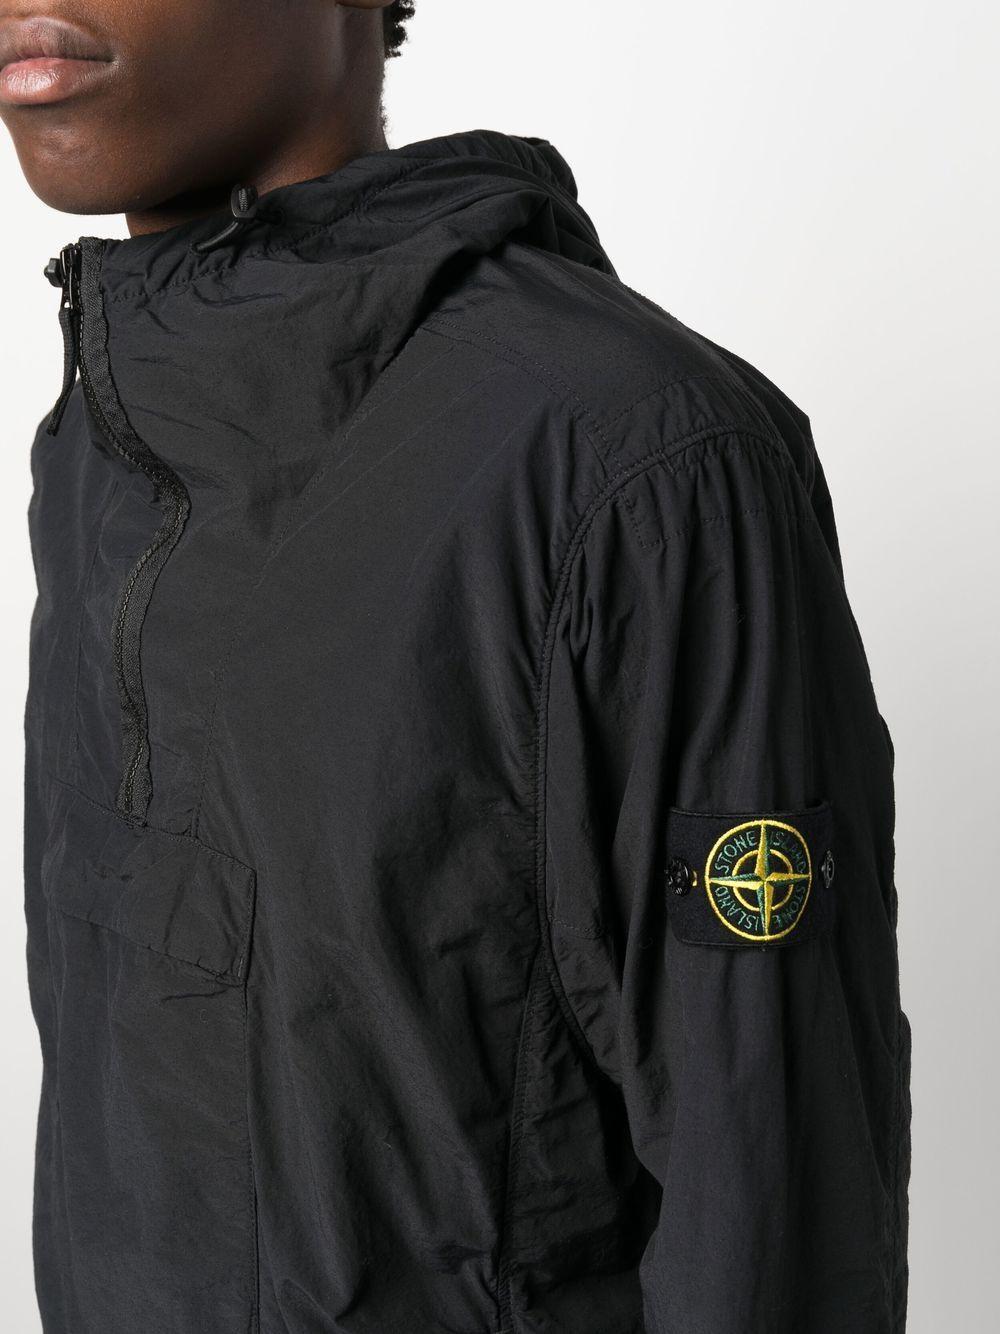 Stone Island Hooded Pullover Jacket in Black for Men | Lyst